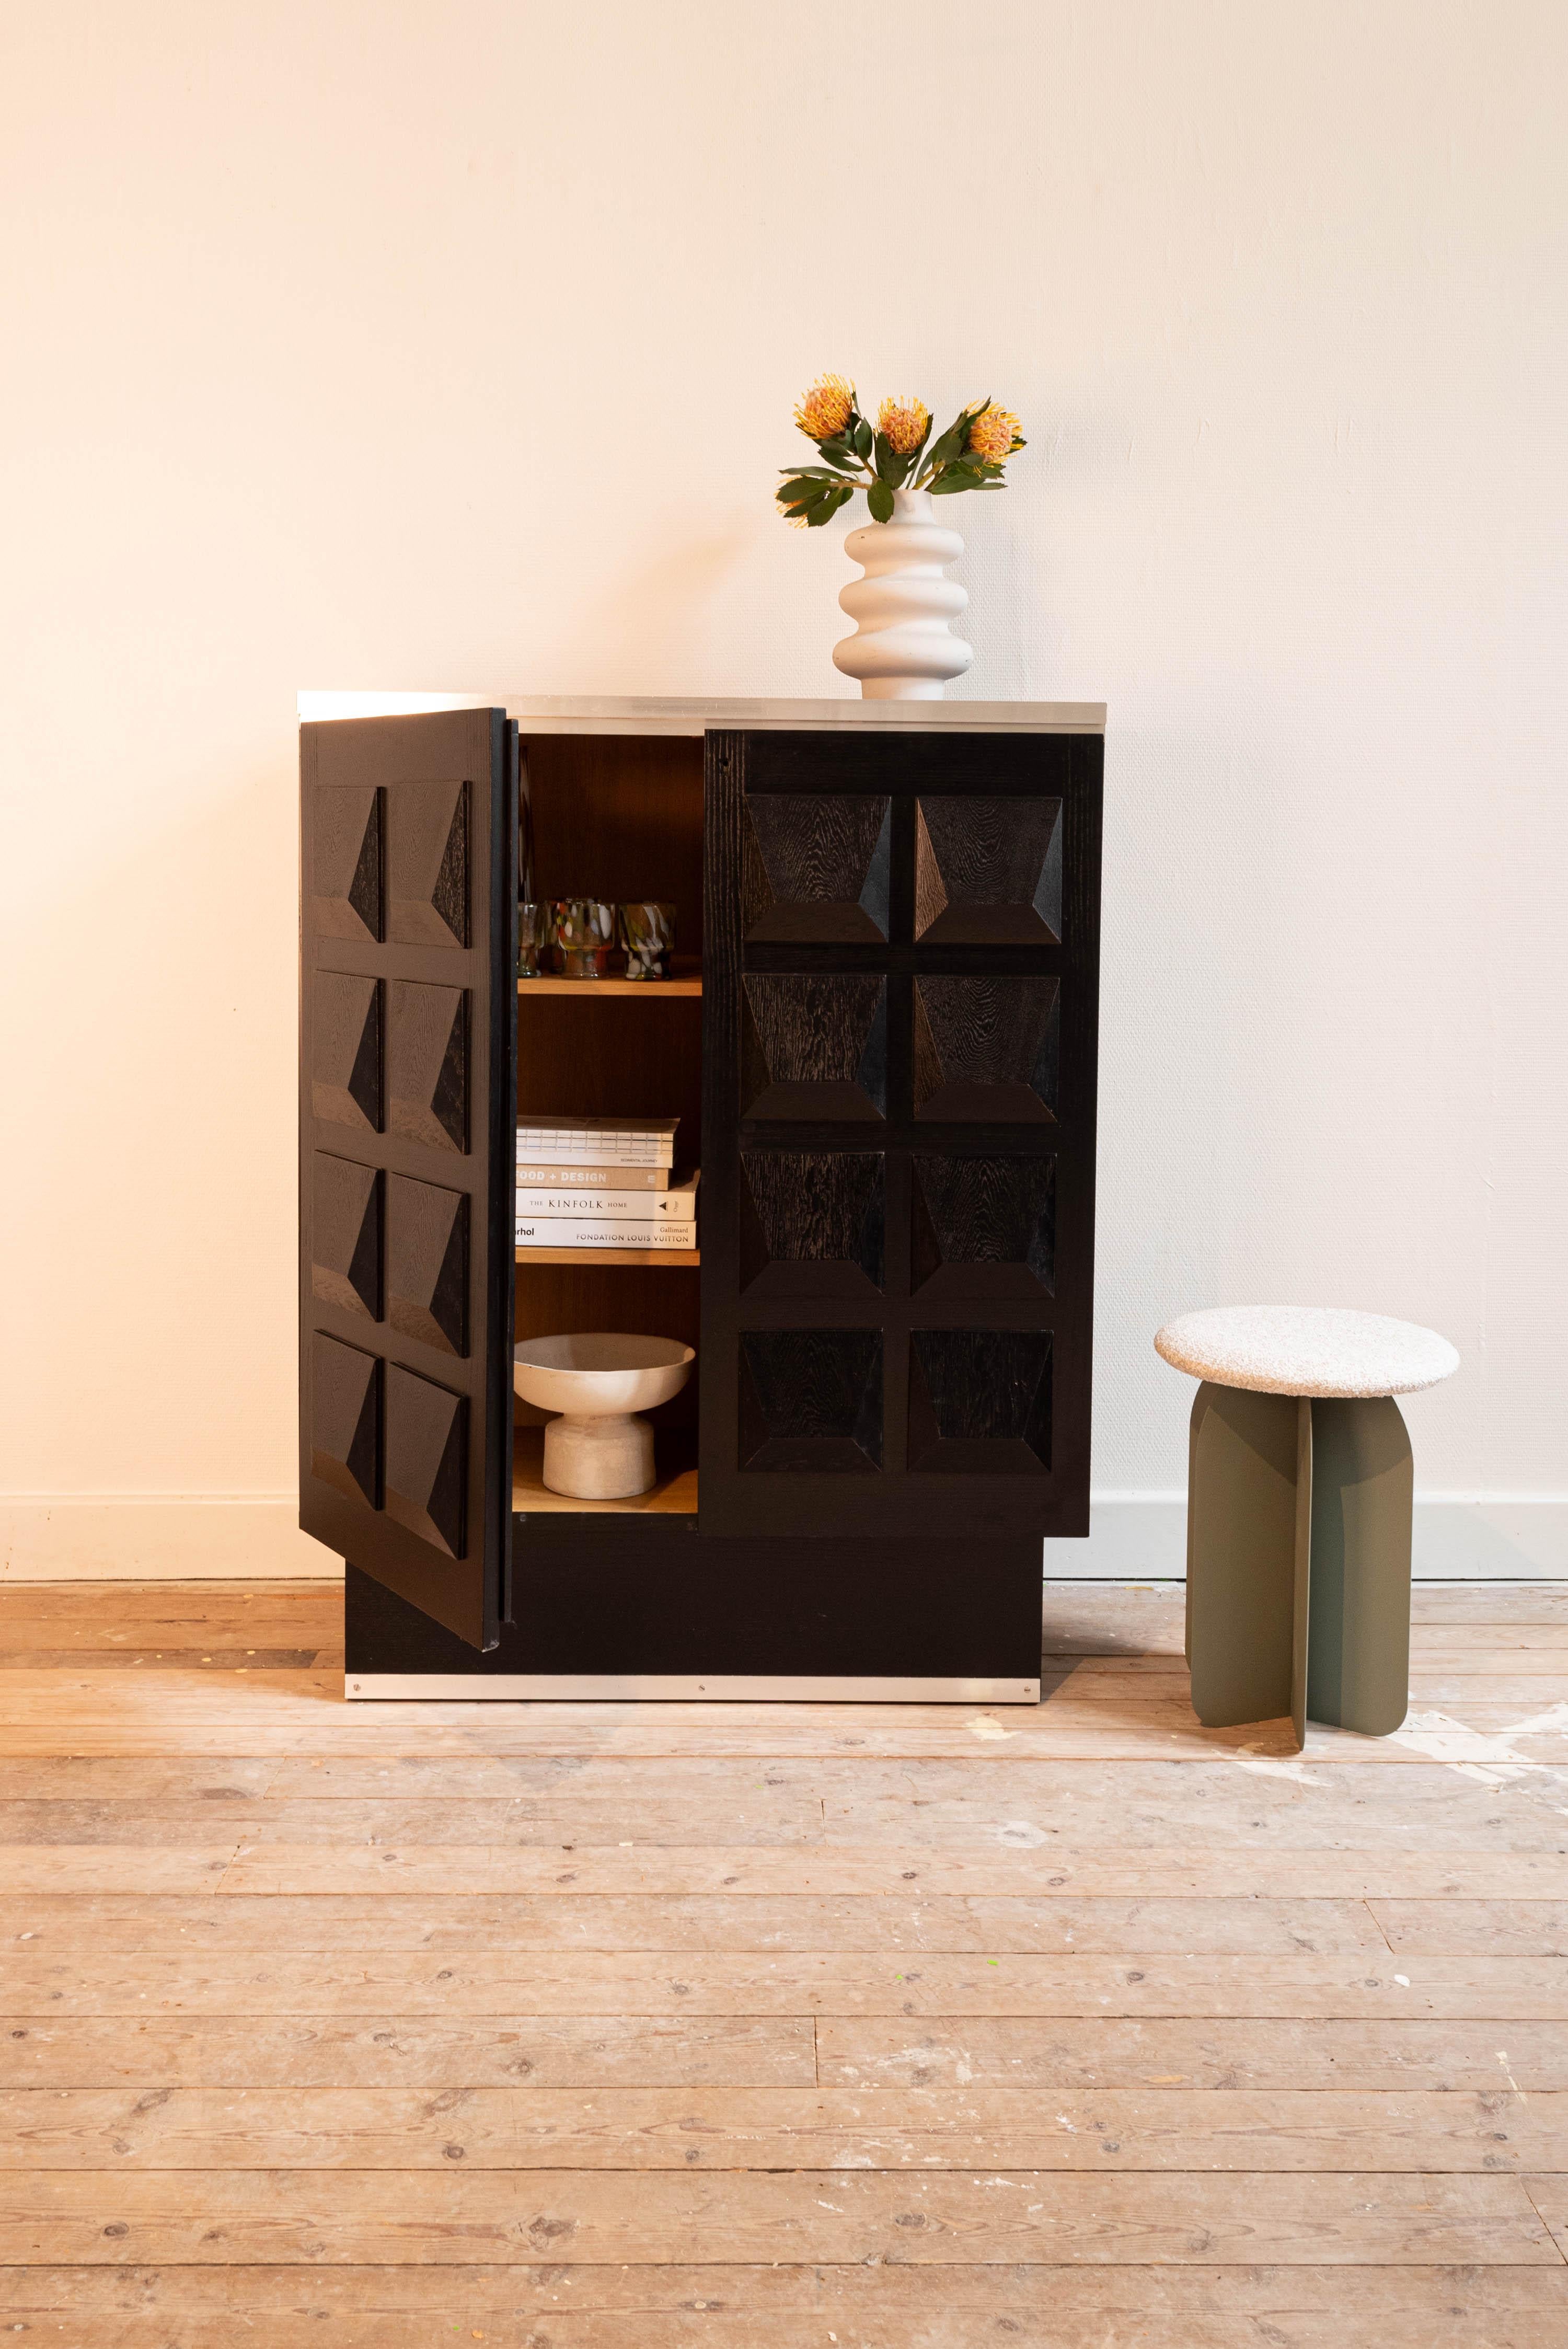 A brutalist De Coene cabinet in black stained oak with two geometric doors, made in Belgium in the 1970s. Behind the diamond pattern doors, this cabinet reveals plenty of storage space, ideal to store and display books, magazines, art and other